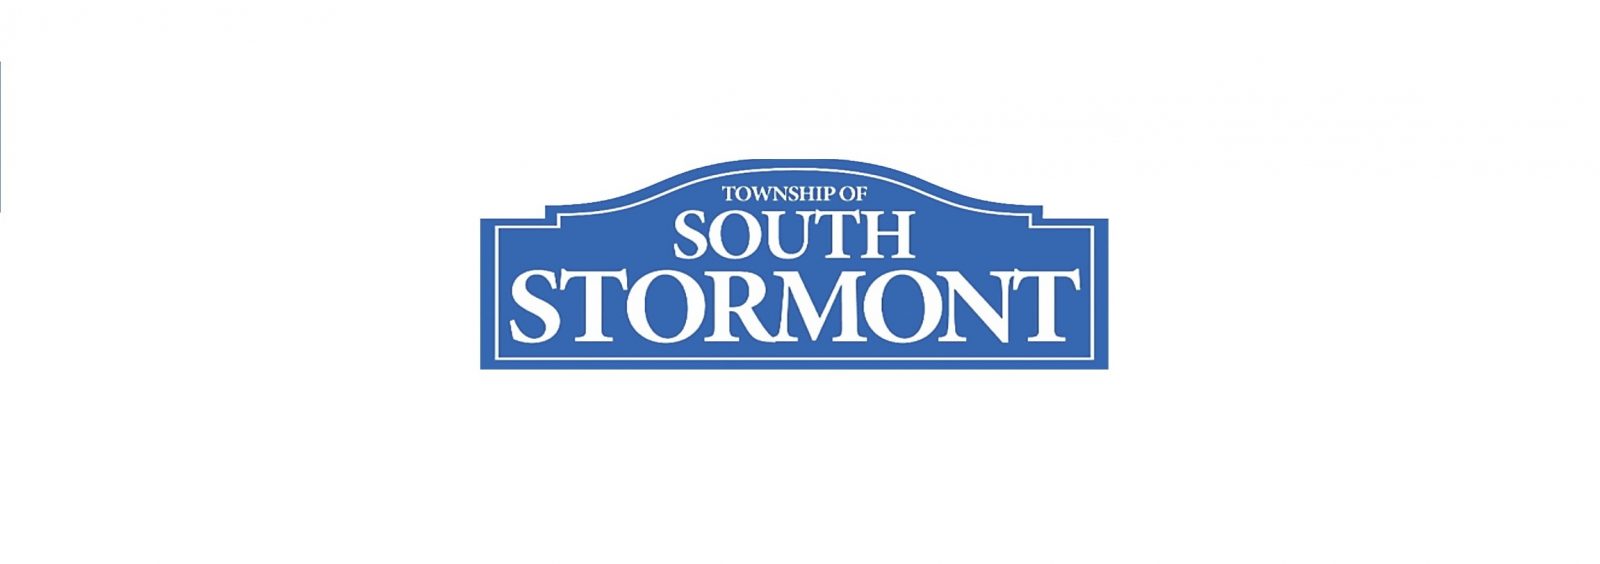 Sign up for South Stormont e-billing for a chance to win a prize